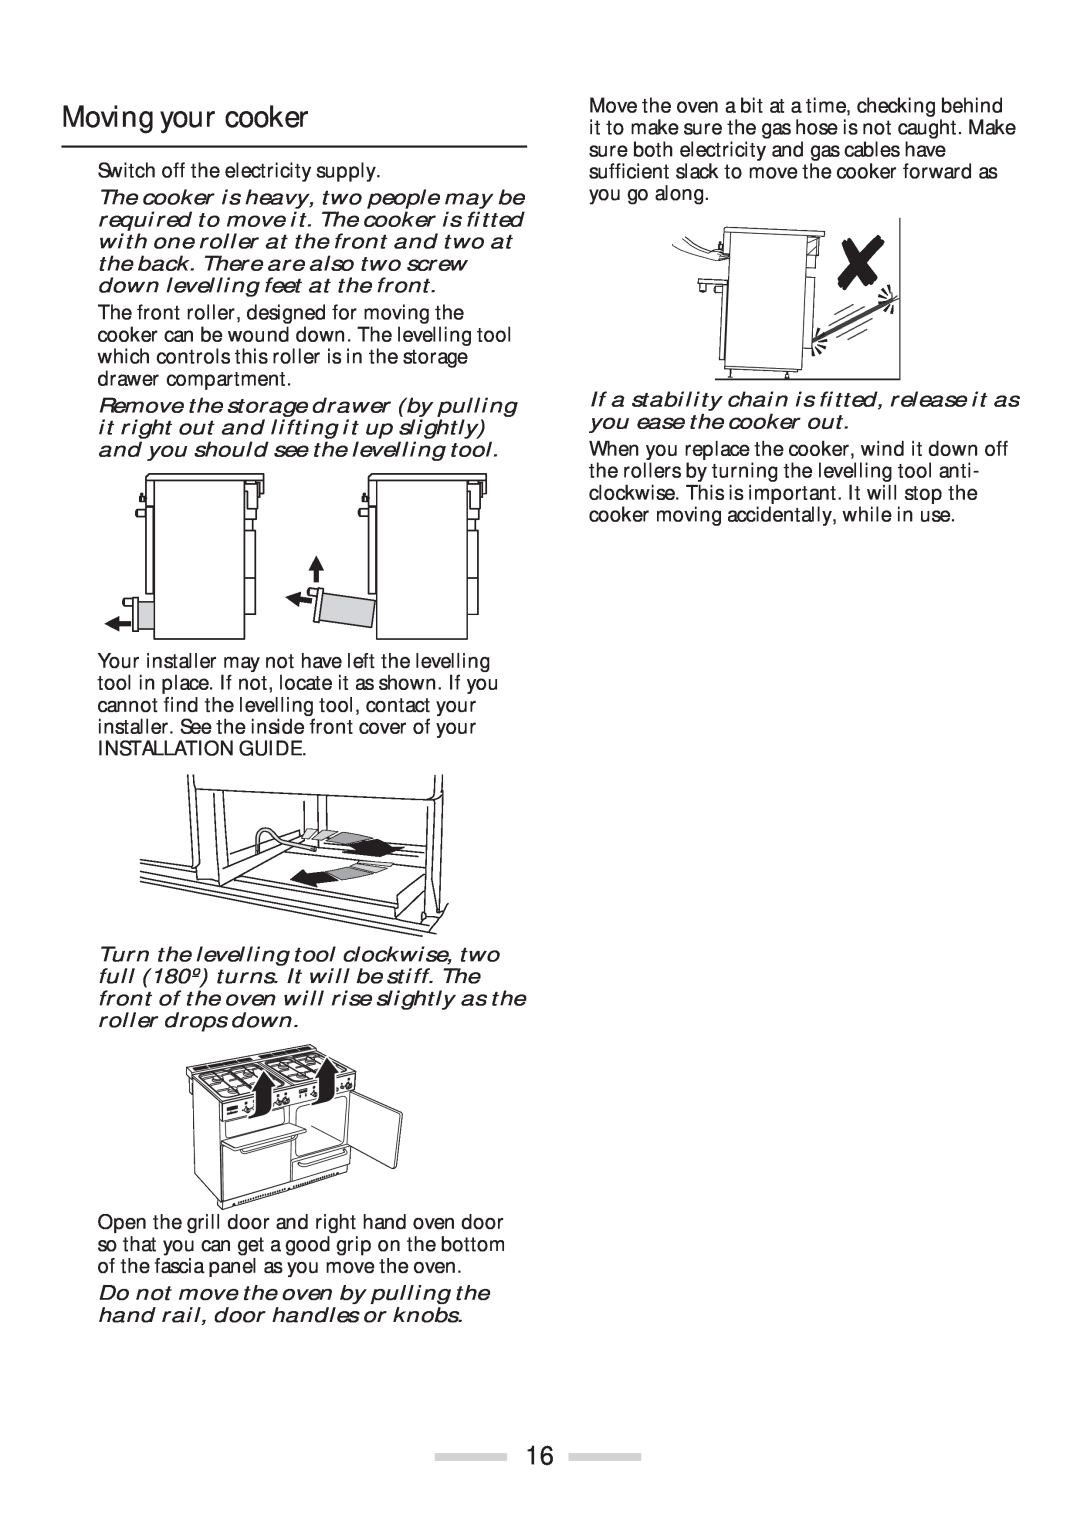 Rangemaster 110 installation instructions Moving your cooker 